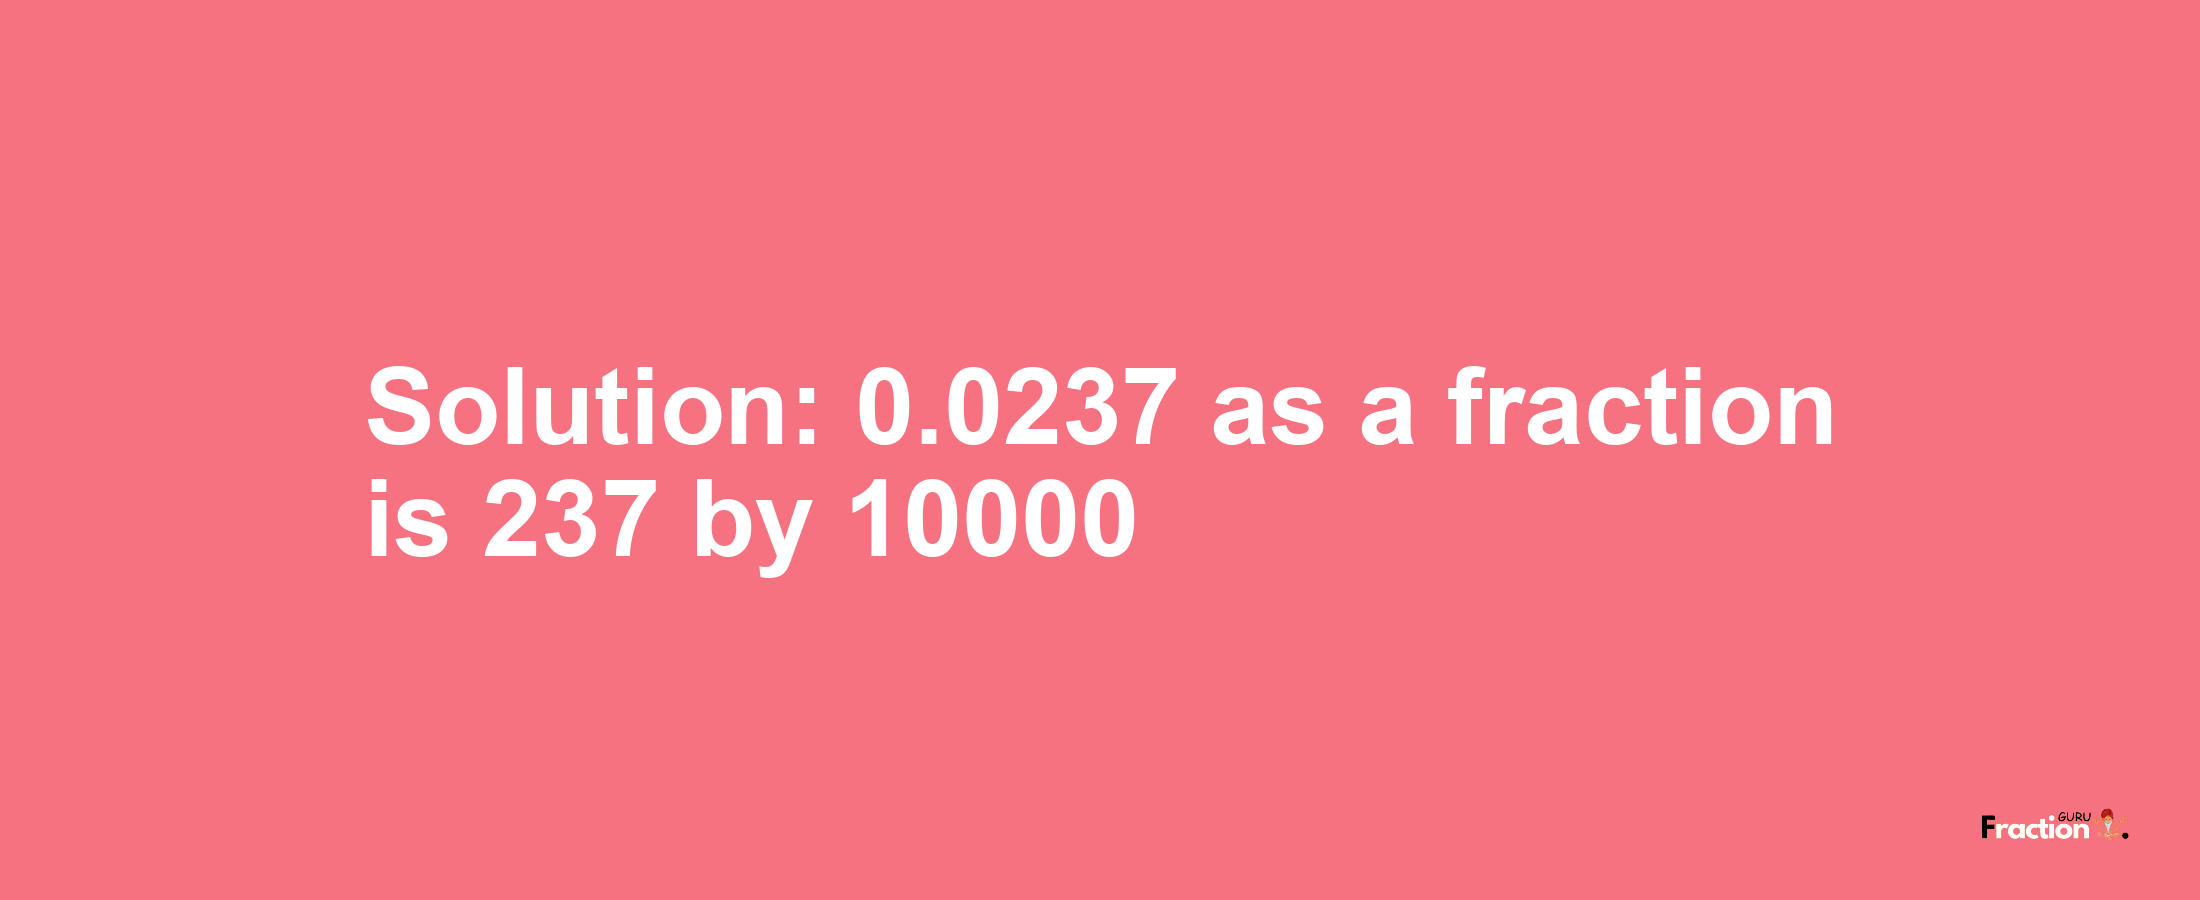 Solution:0.0237 as a fraction is 237/10000